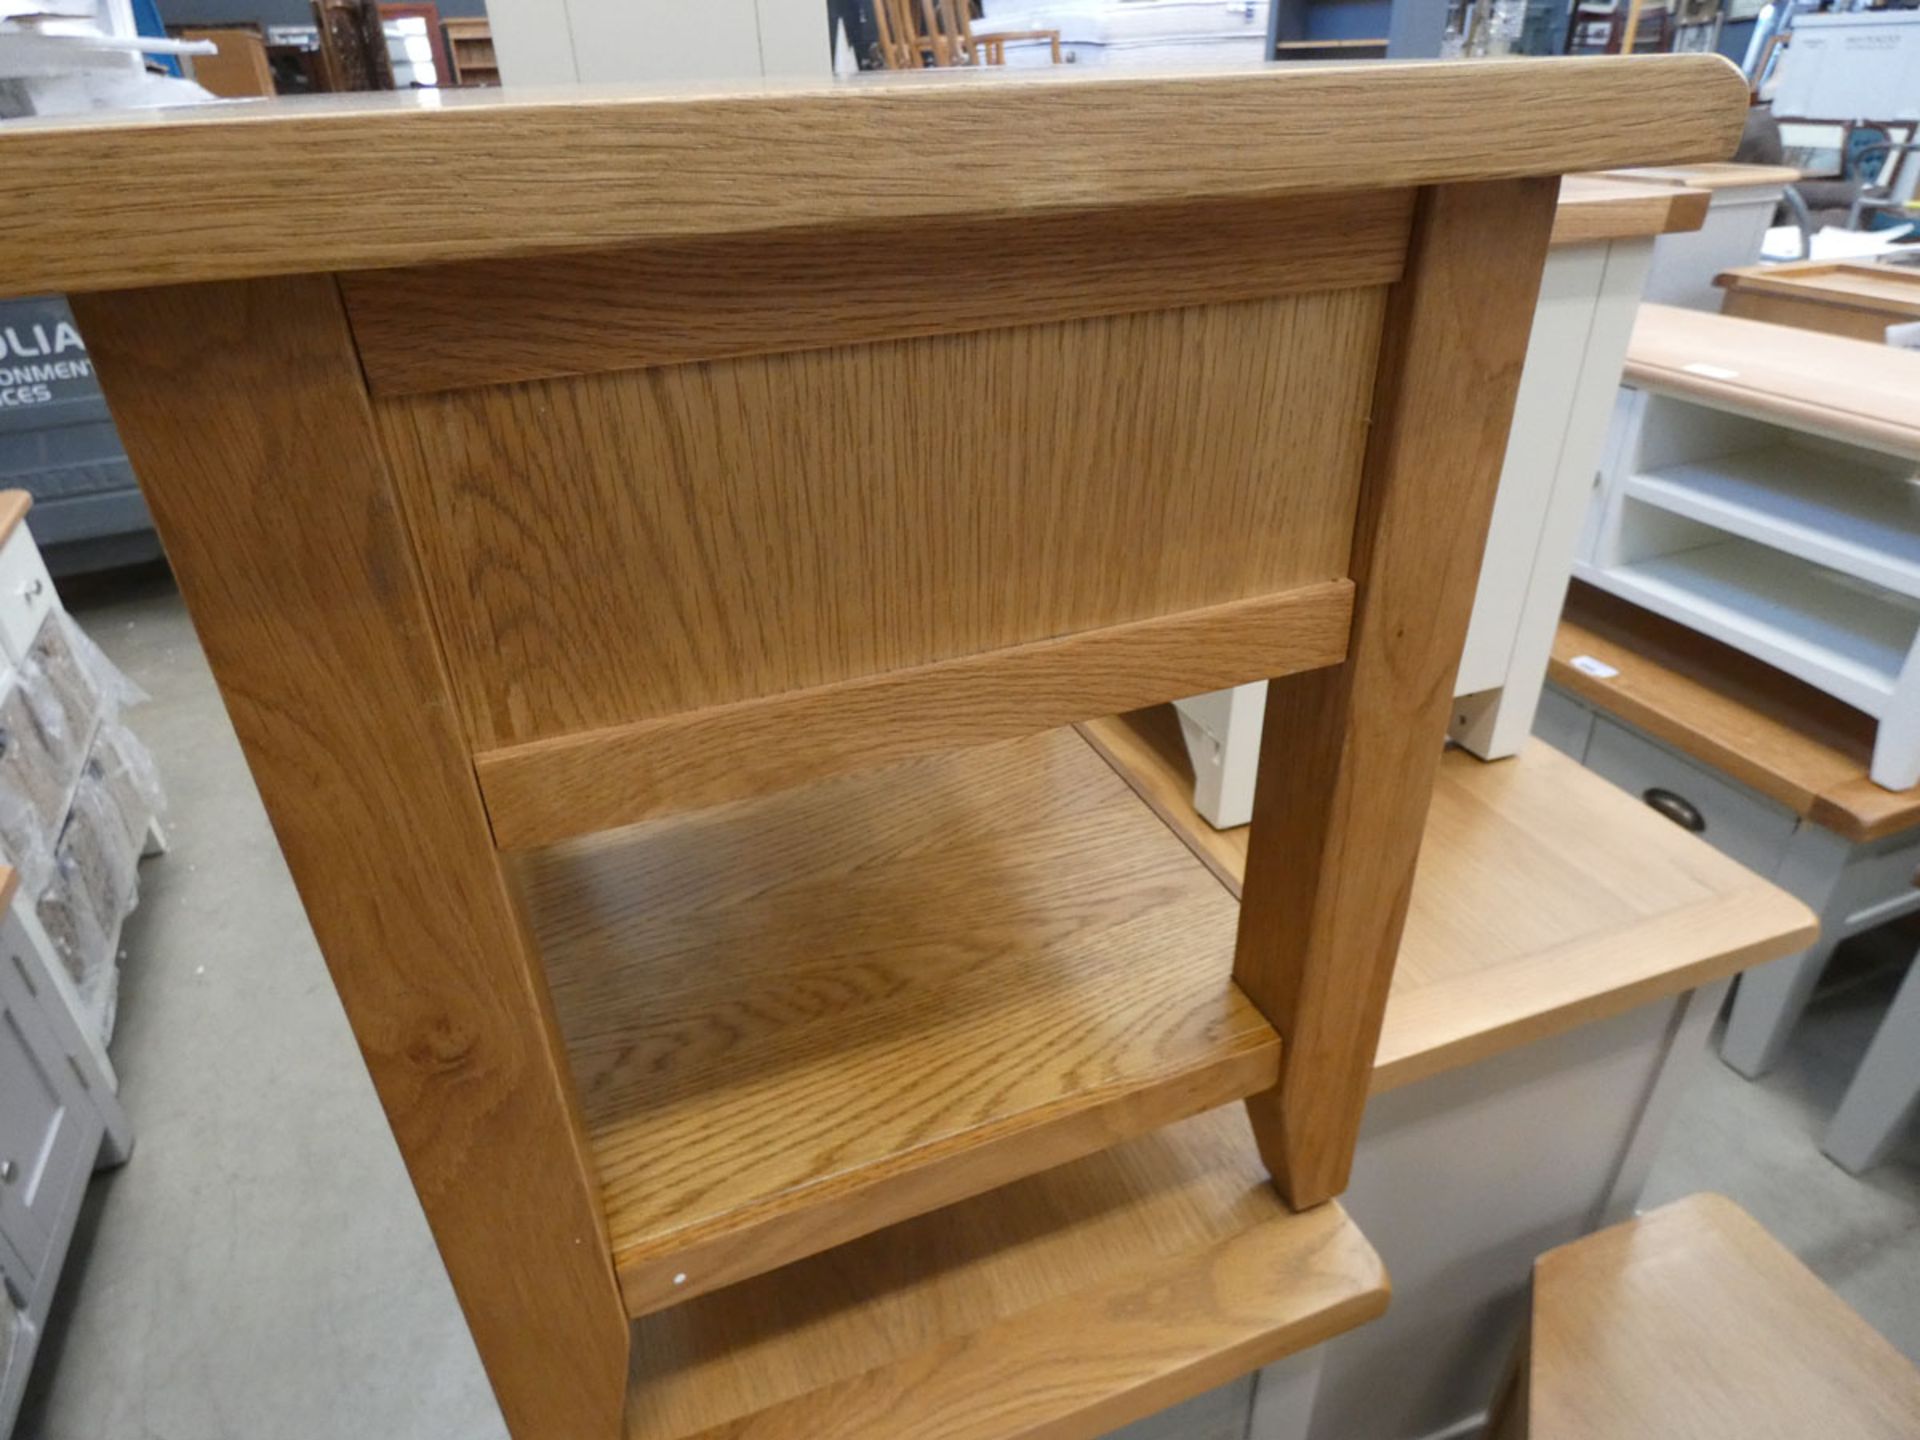 Oak lamp table with shelf under (16) - Image 3 of 4